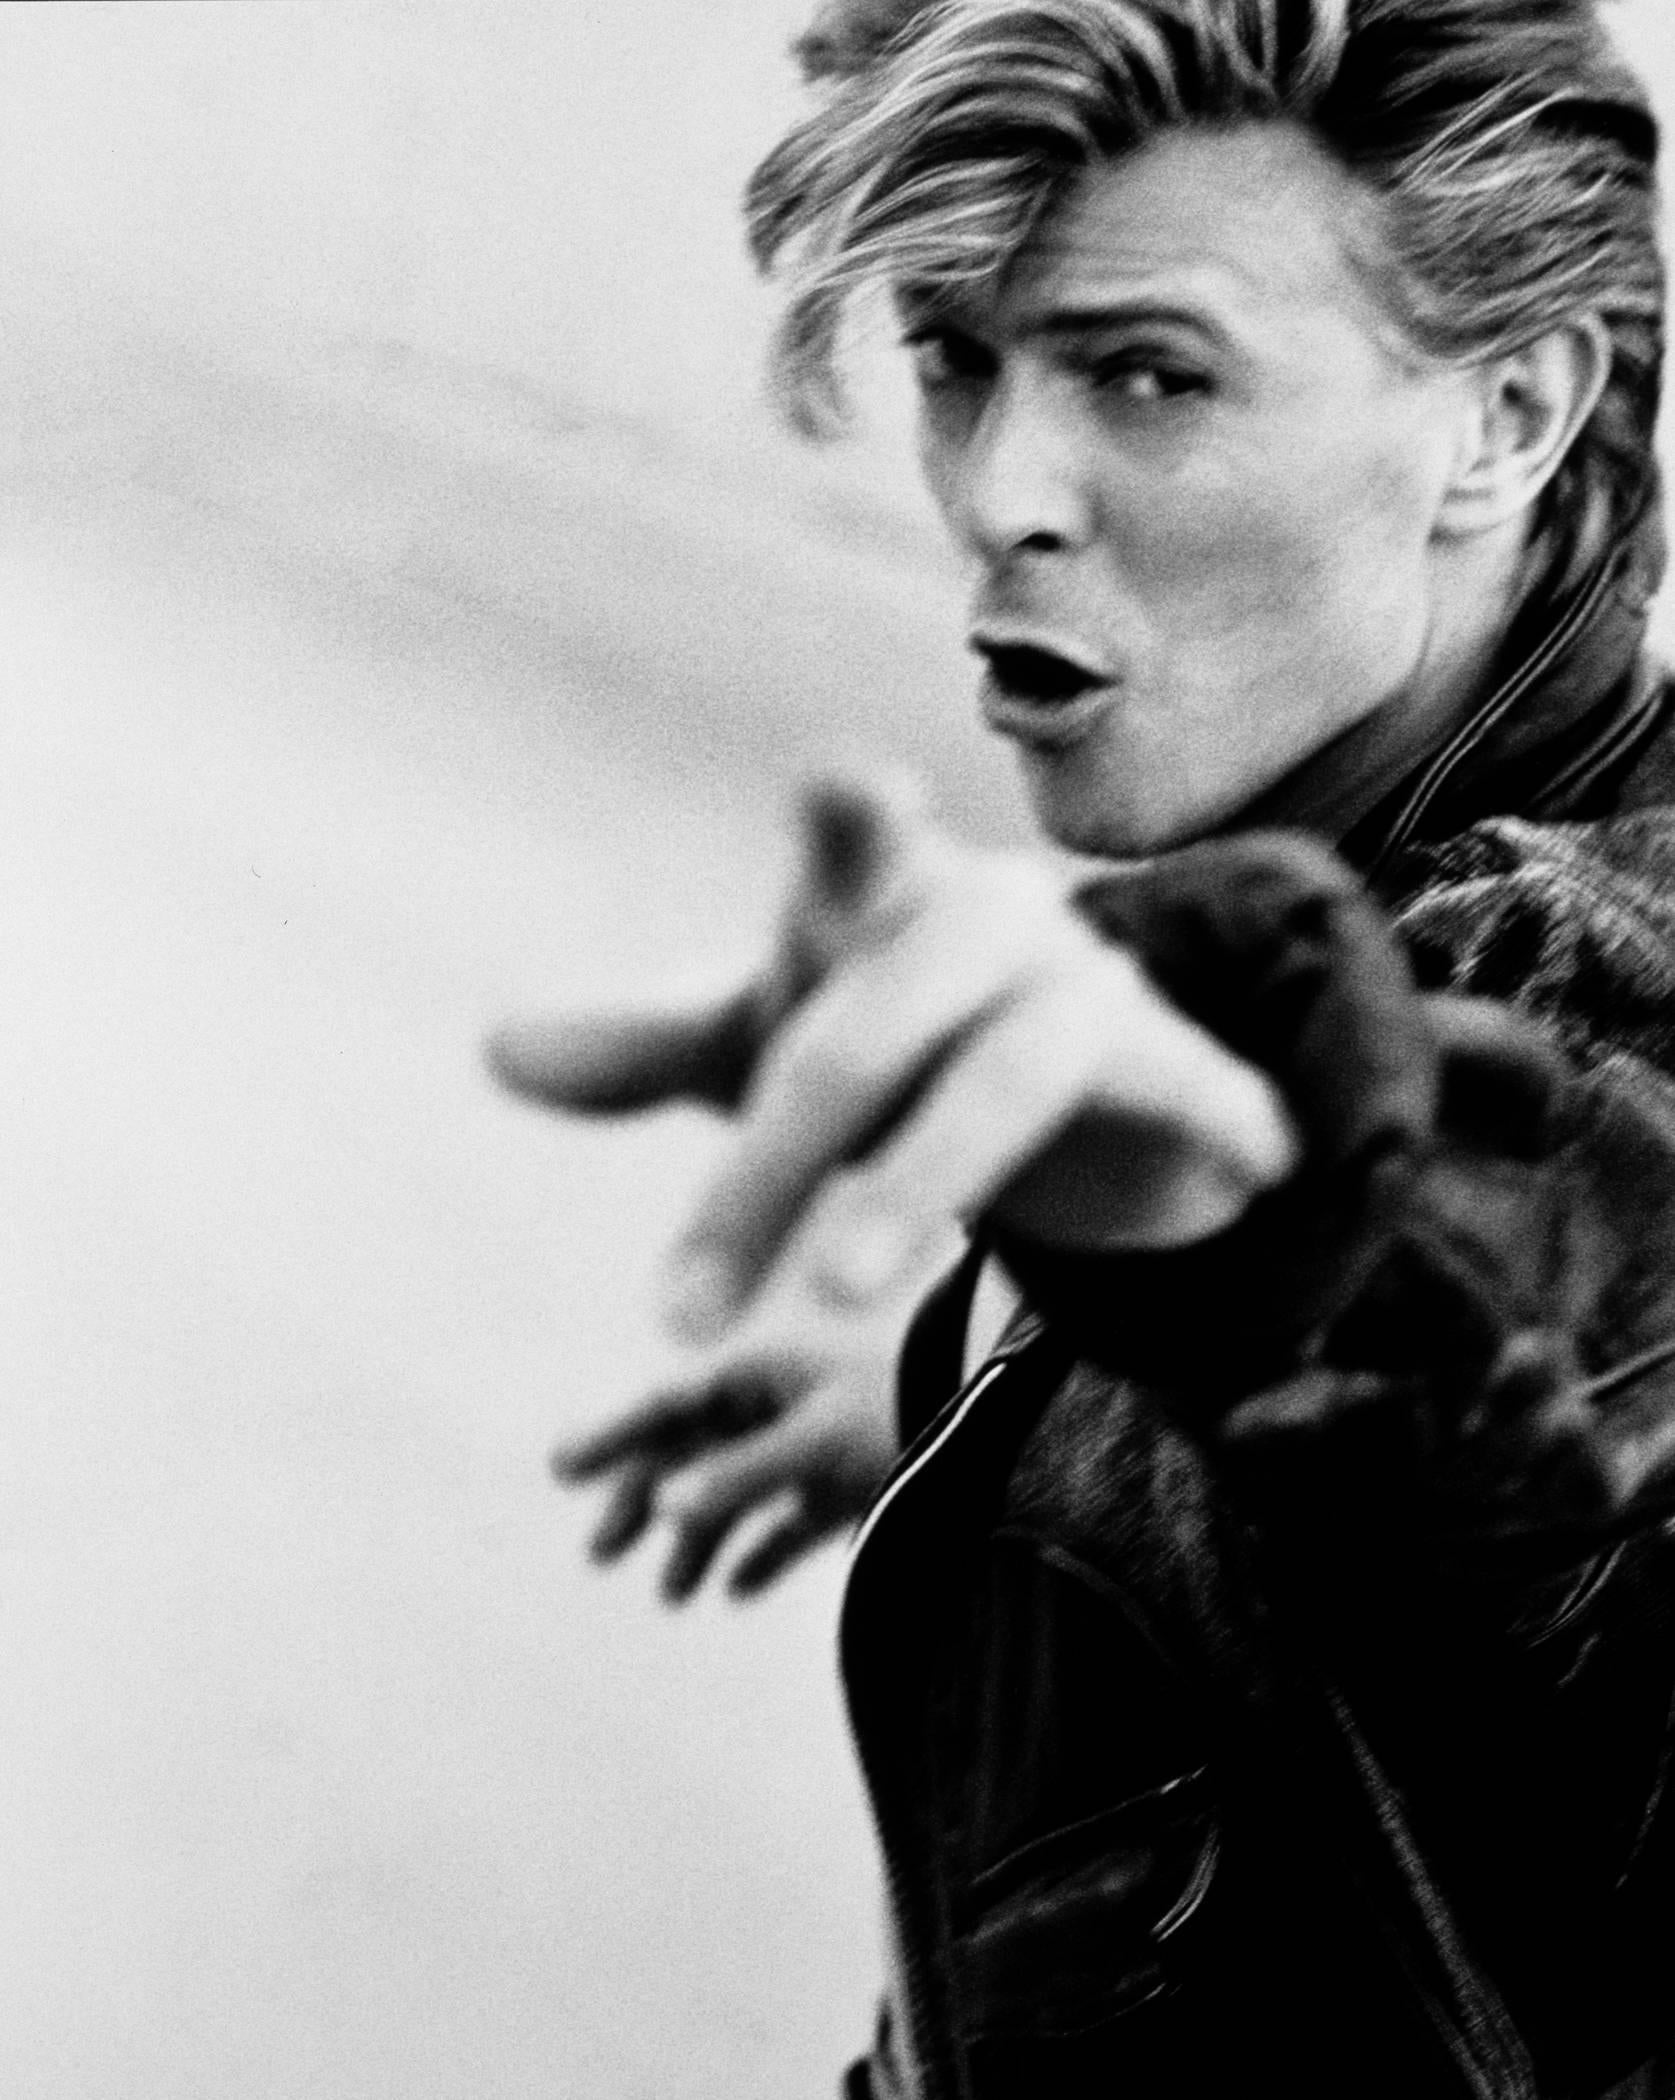 Herb Ritts Portrait Photograph - David Bowie III, Los Angeles